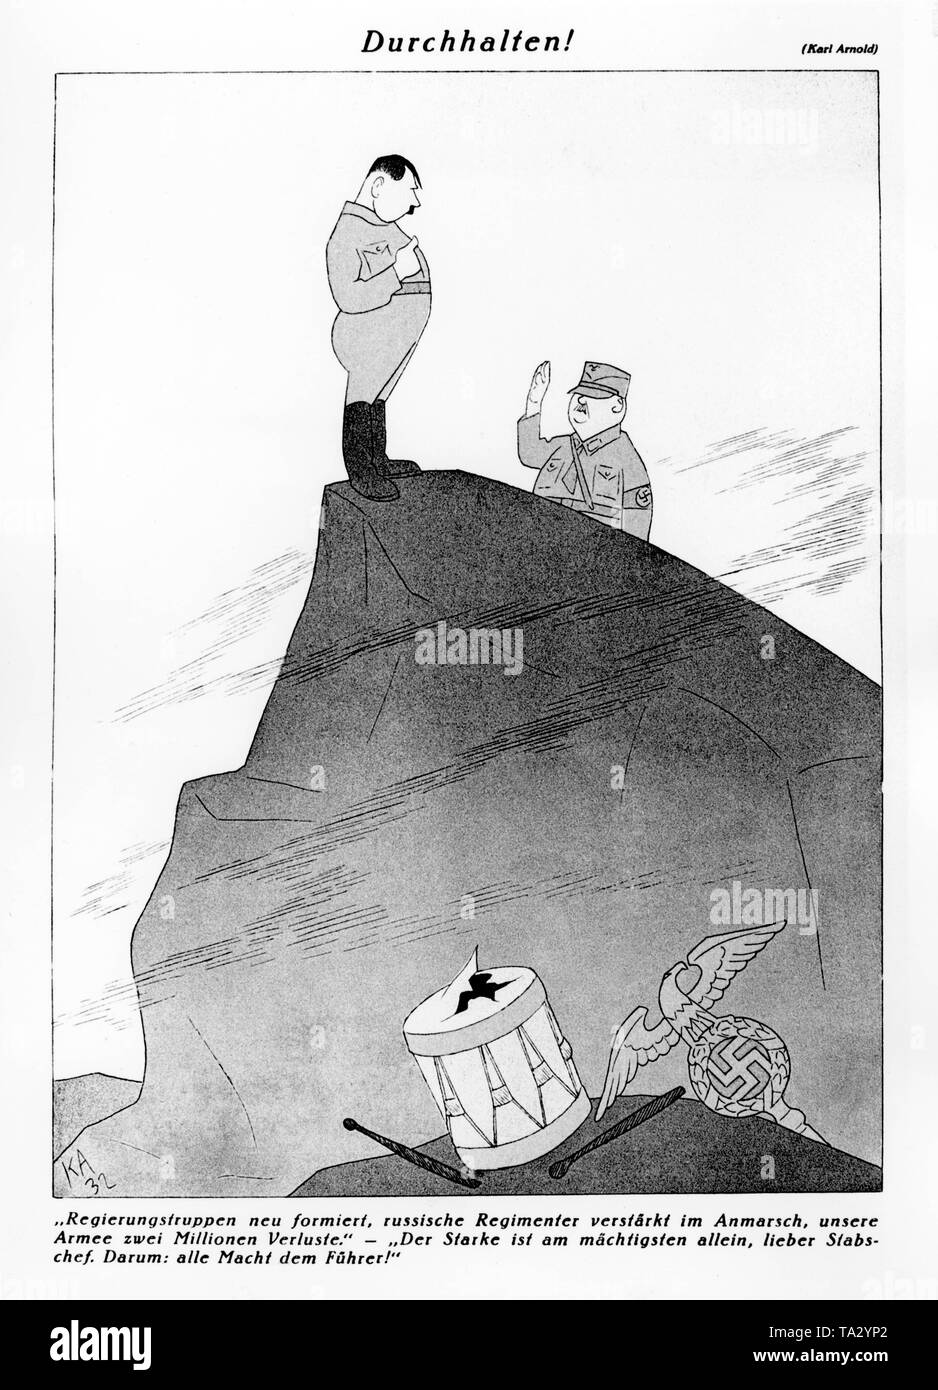 Hitler is depicted together with the Chief of Staff of the SA, Ernst Rohm. The caption of the image is a fictional conversation: 'Hang on!'' Government forces reorganized, Russian regiments strengthened in march, our army suffered two million losses.' 'The strong one is the most powerful alone, chief of staff. Therefore, all power to the Leader! ' Stock Photo